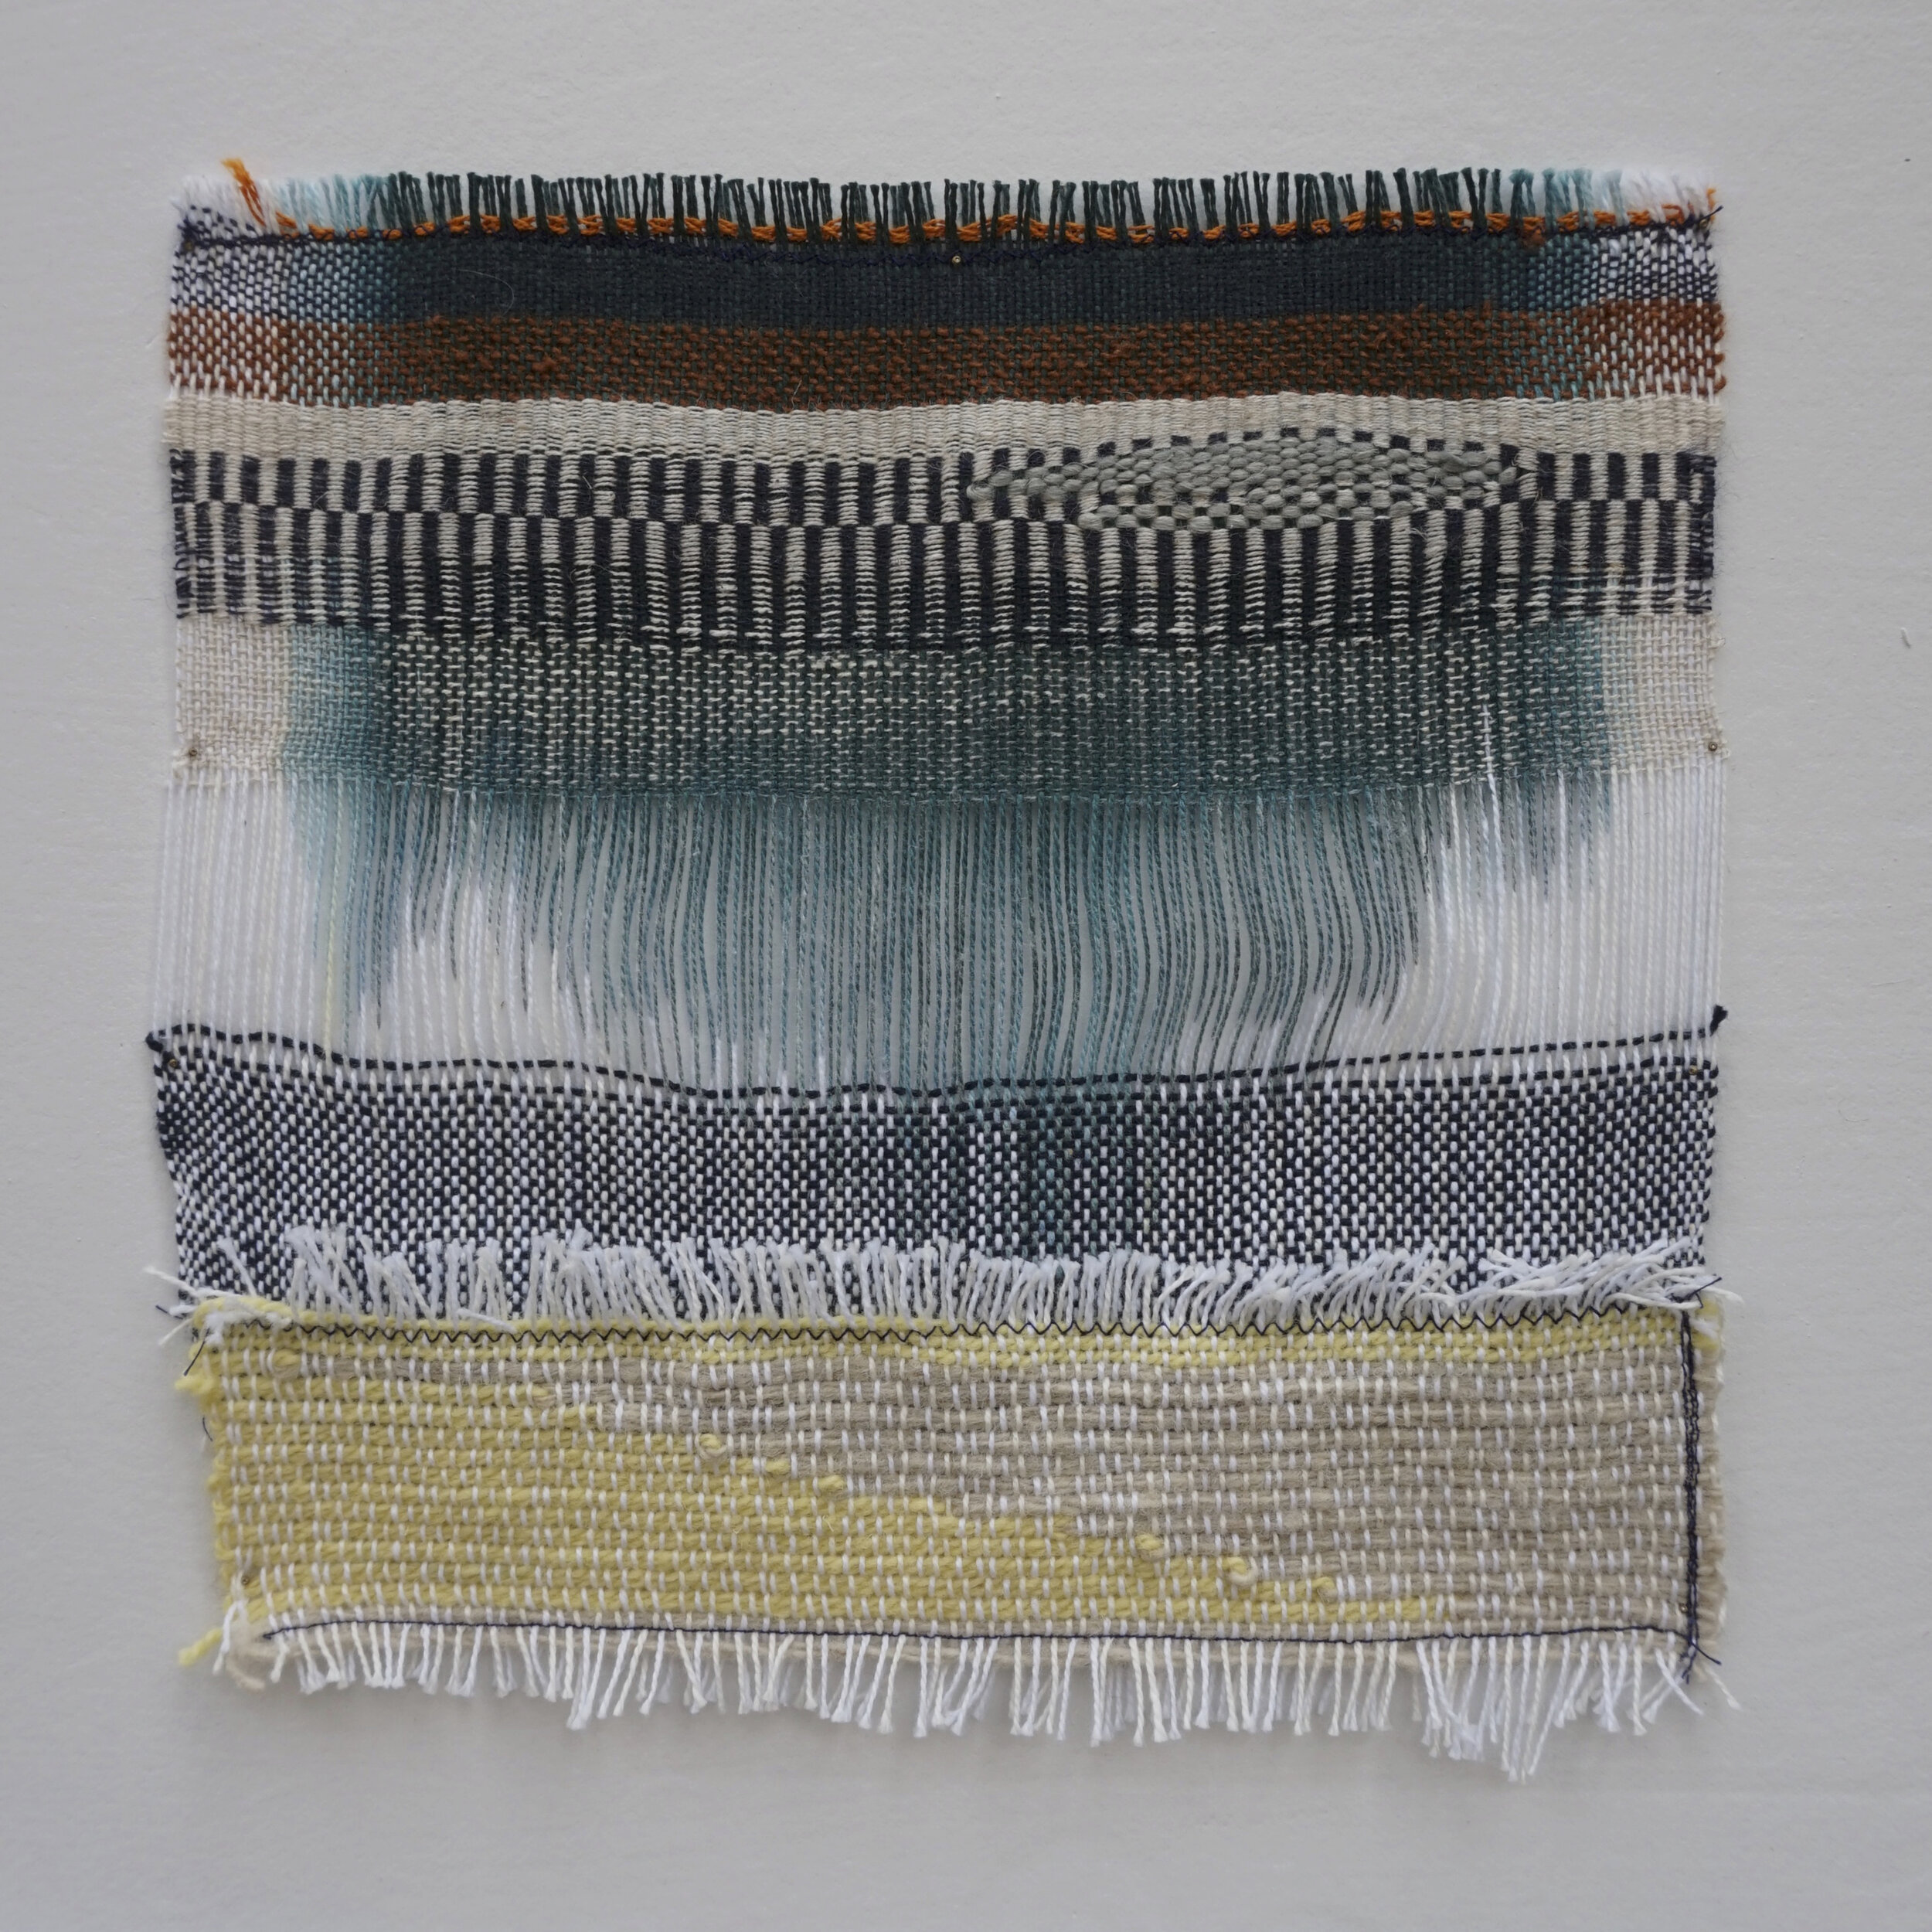 Woven Study 4, 2018, Cotton and acrylic, 10" x 10"